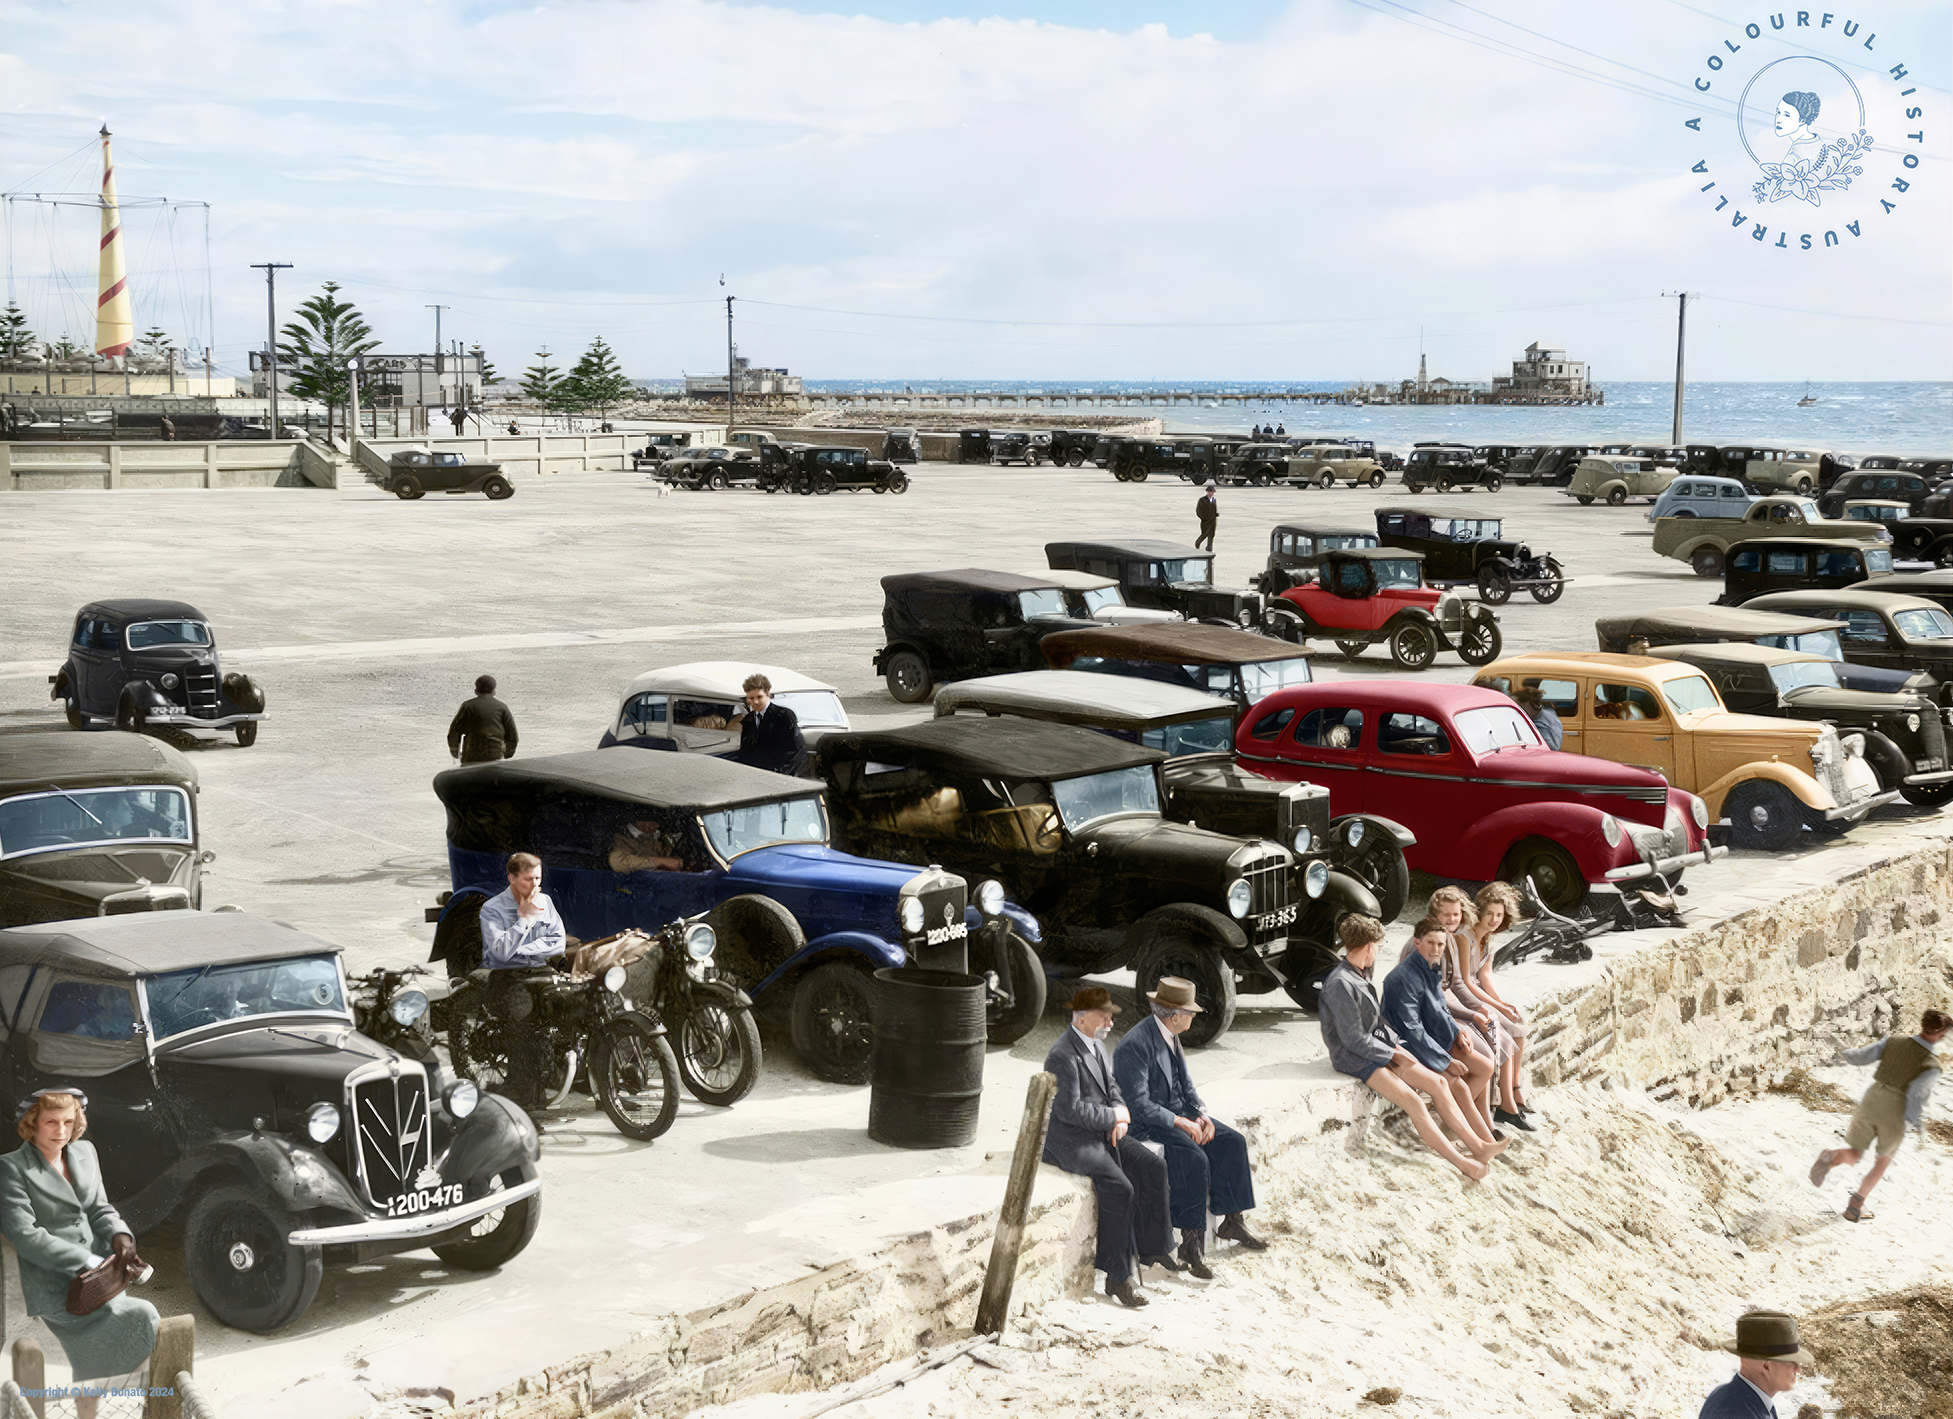 colourised image of historical cars parked at a beach. Beachgoers sit on a ledge next to the sand in front of the cars and the ocean can be seen in the background.